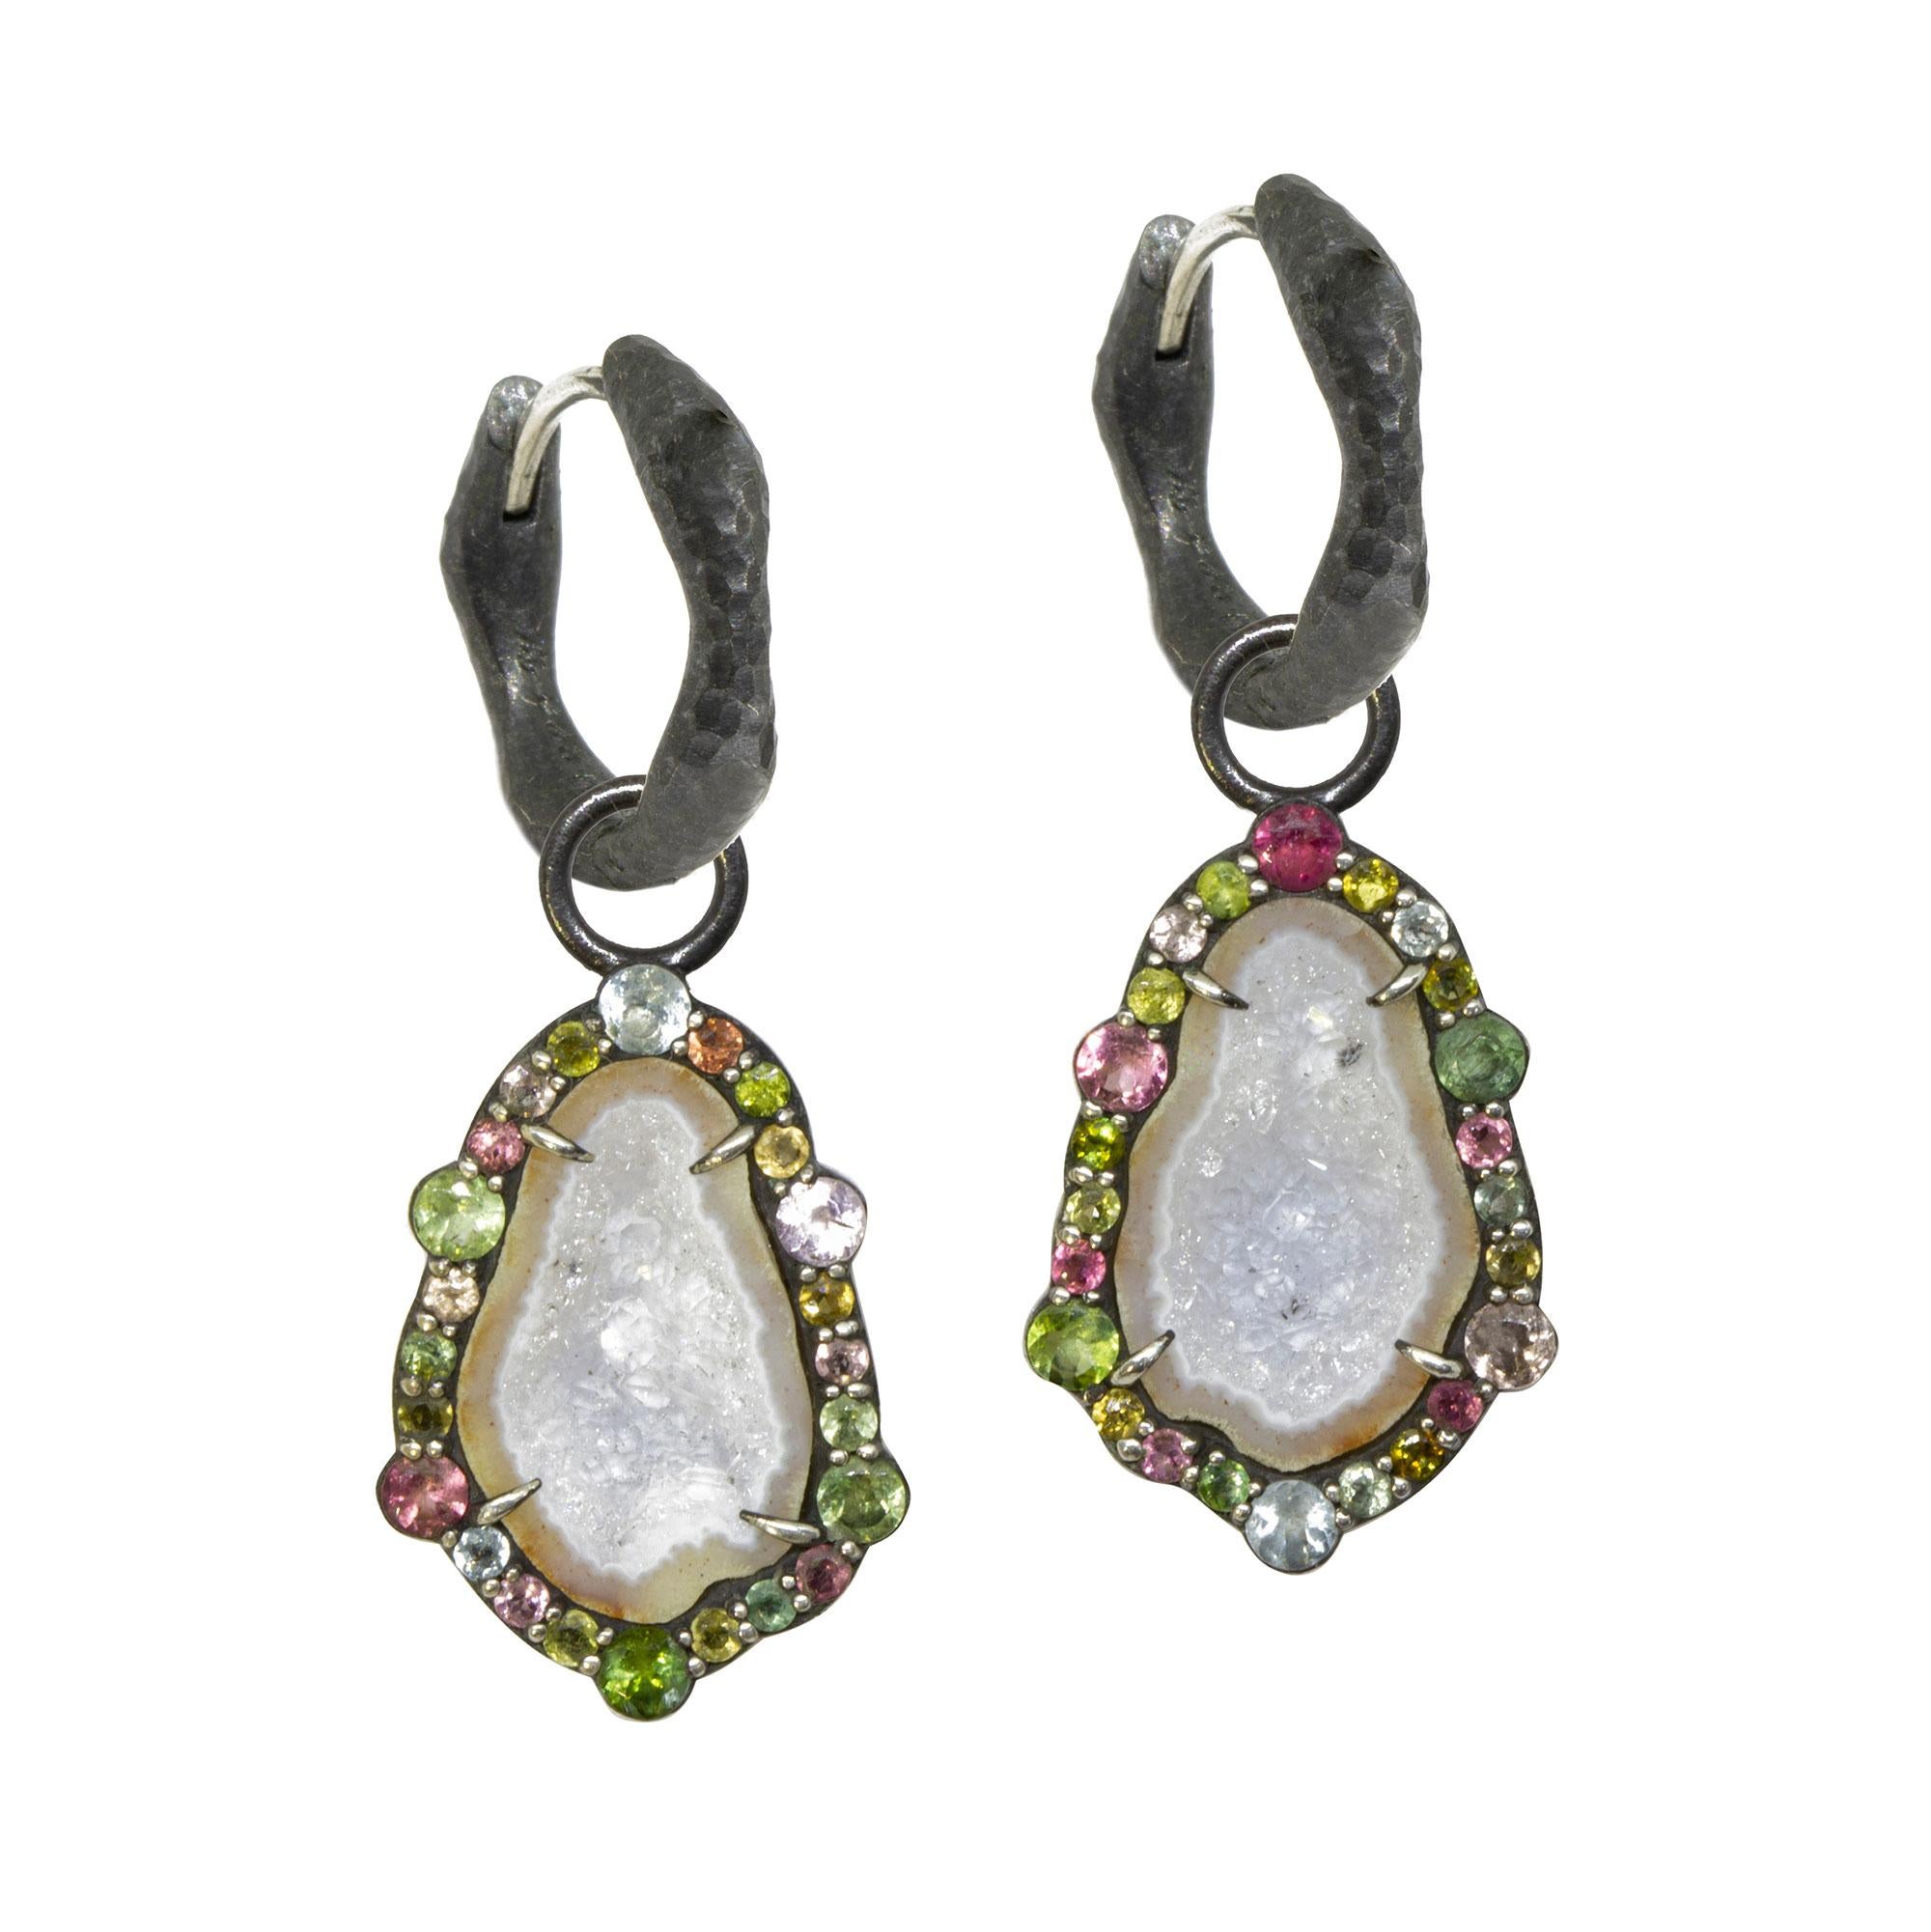 Earthy and unique, our one-of-a-kind Geode Earring Charms adorned with vivid multi tourmalines is a true delight. The intricate and detailed charms change up your style instantly, by giving you a bohemian chic vibe. Pair them with another charm (or